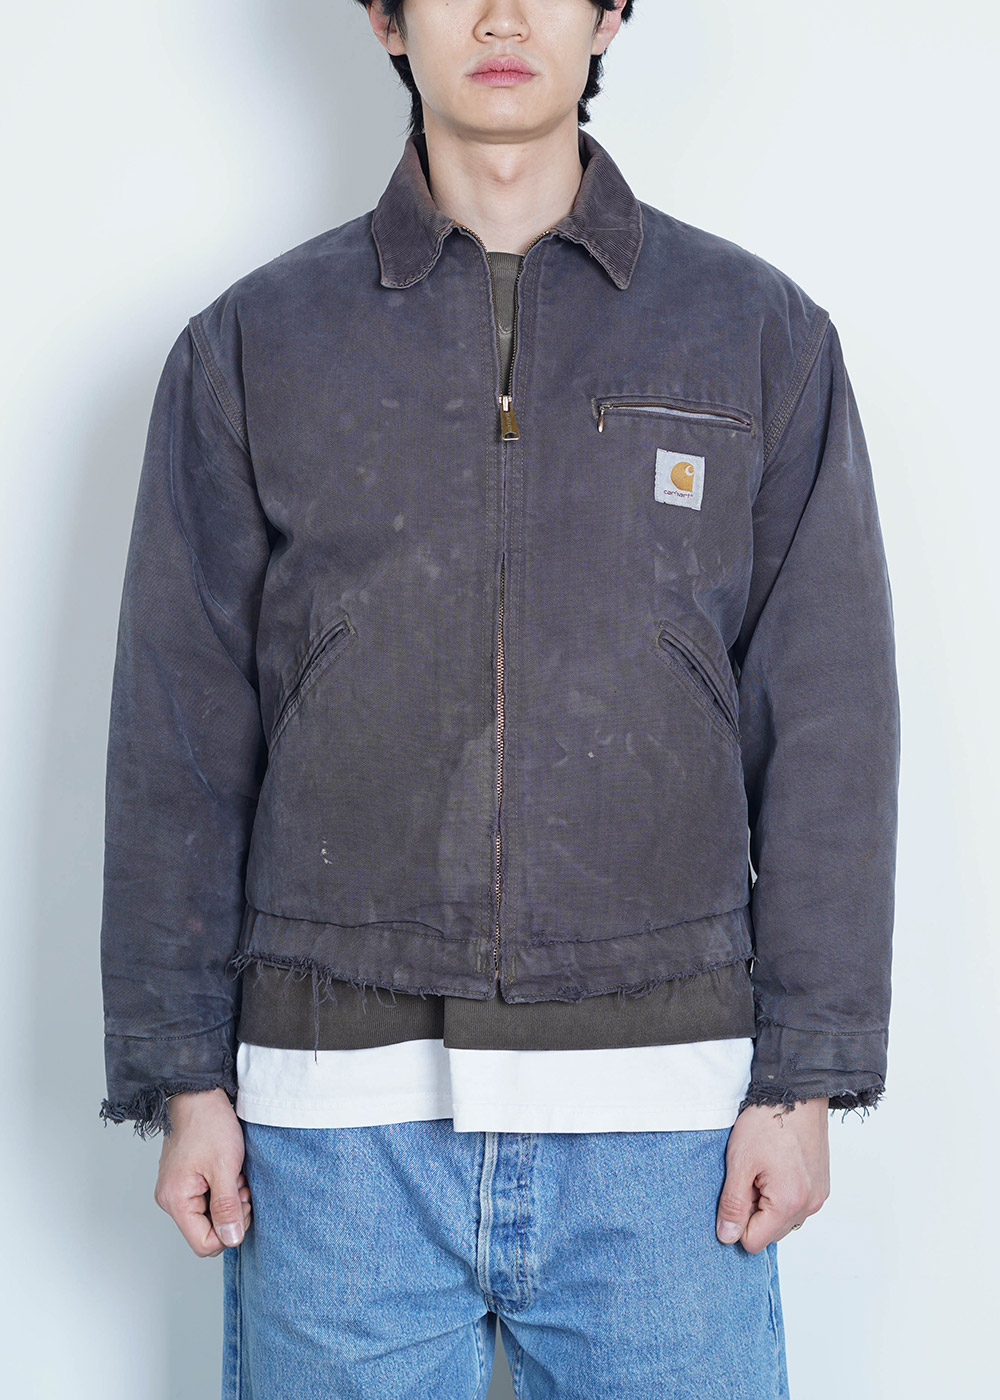 reproduction 036 / carhartt (Overdyed)